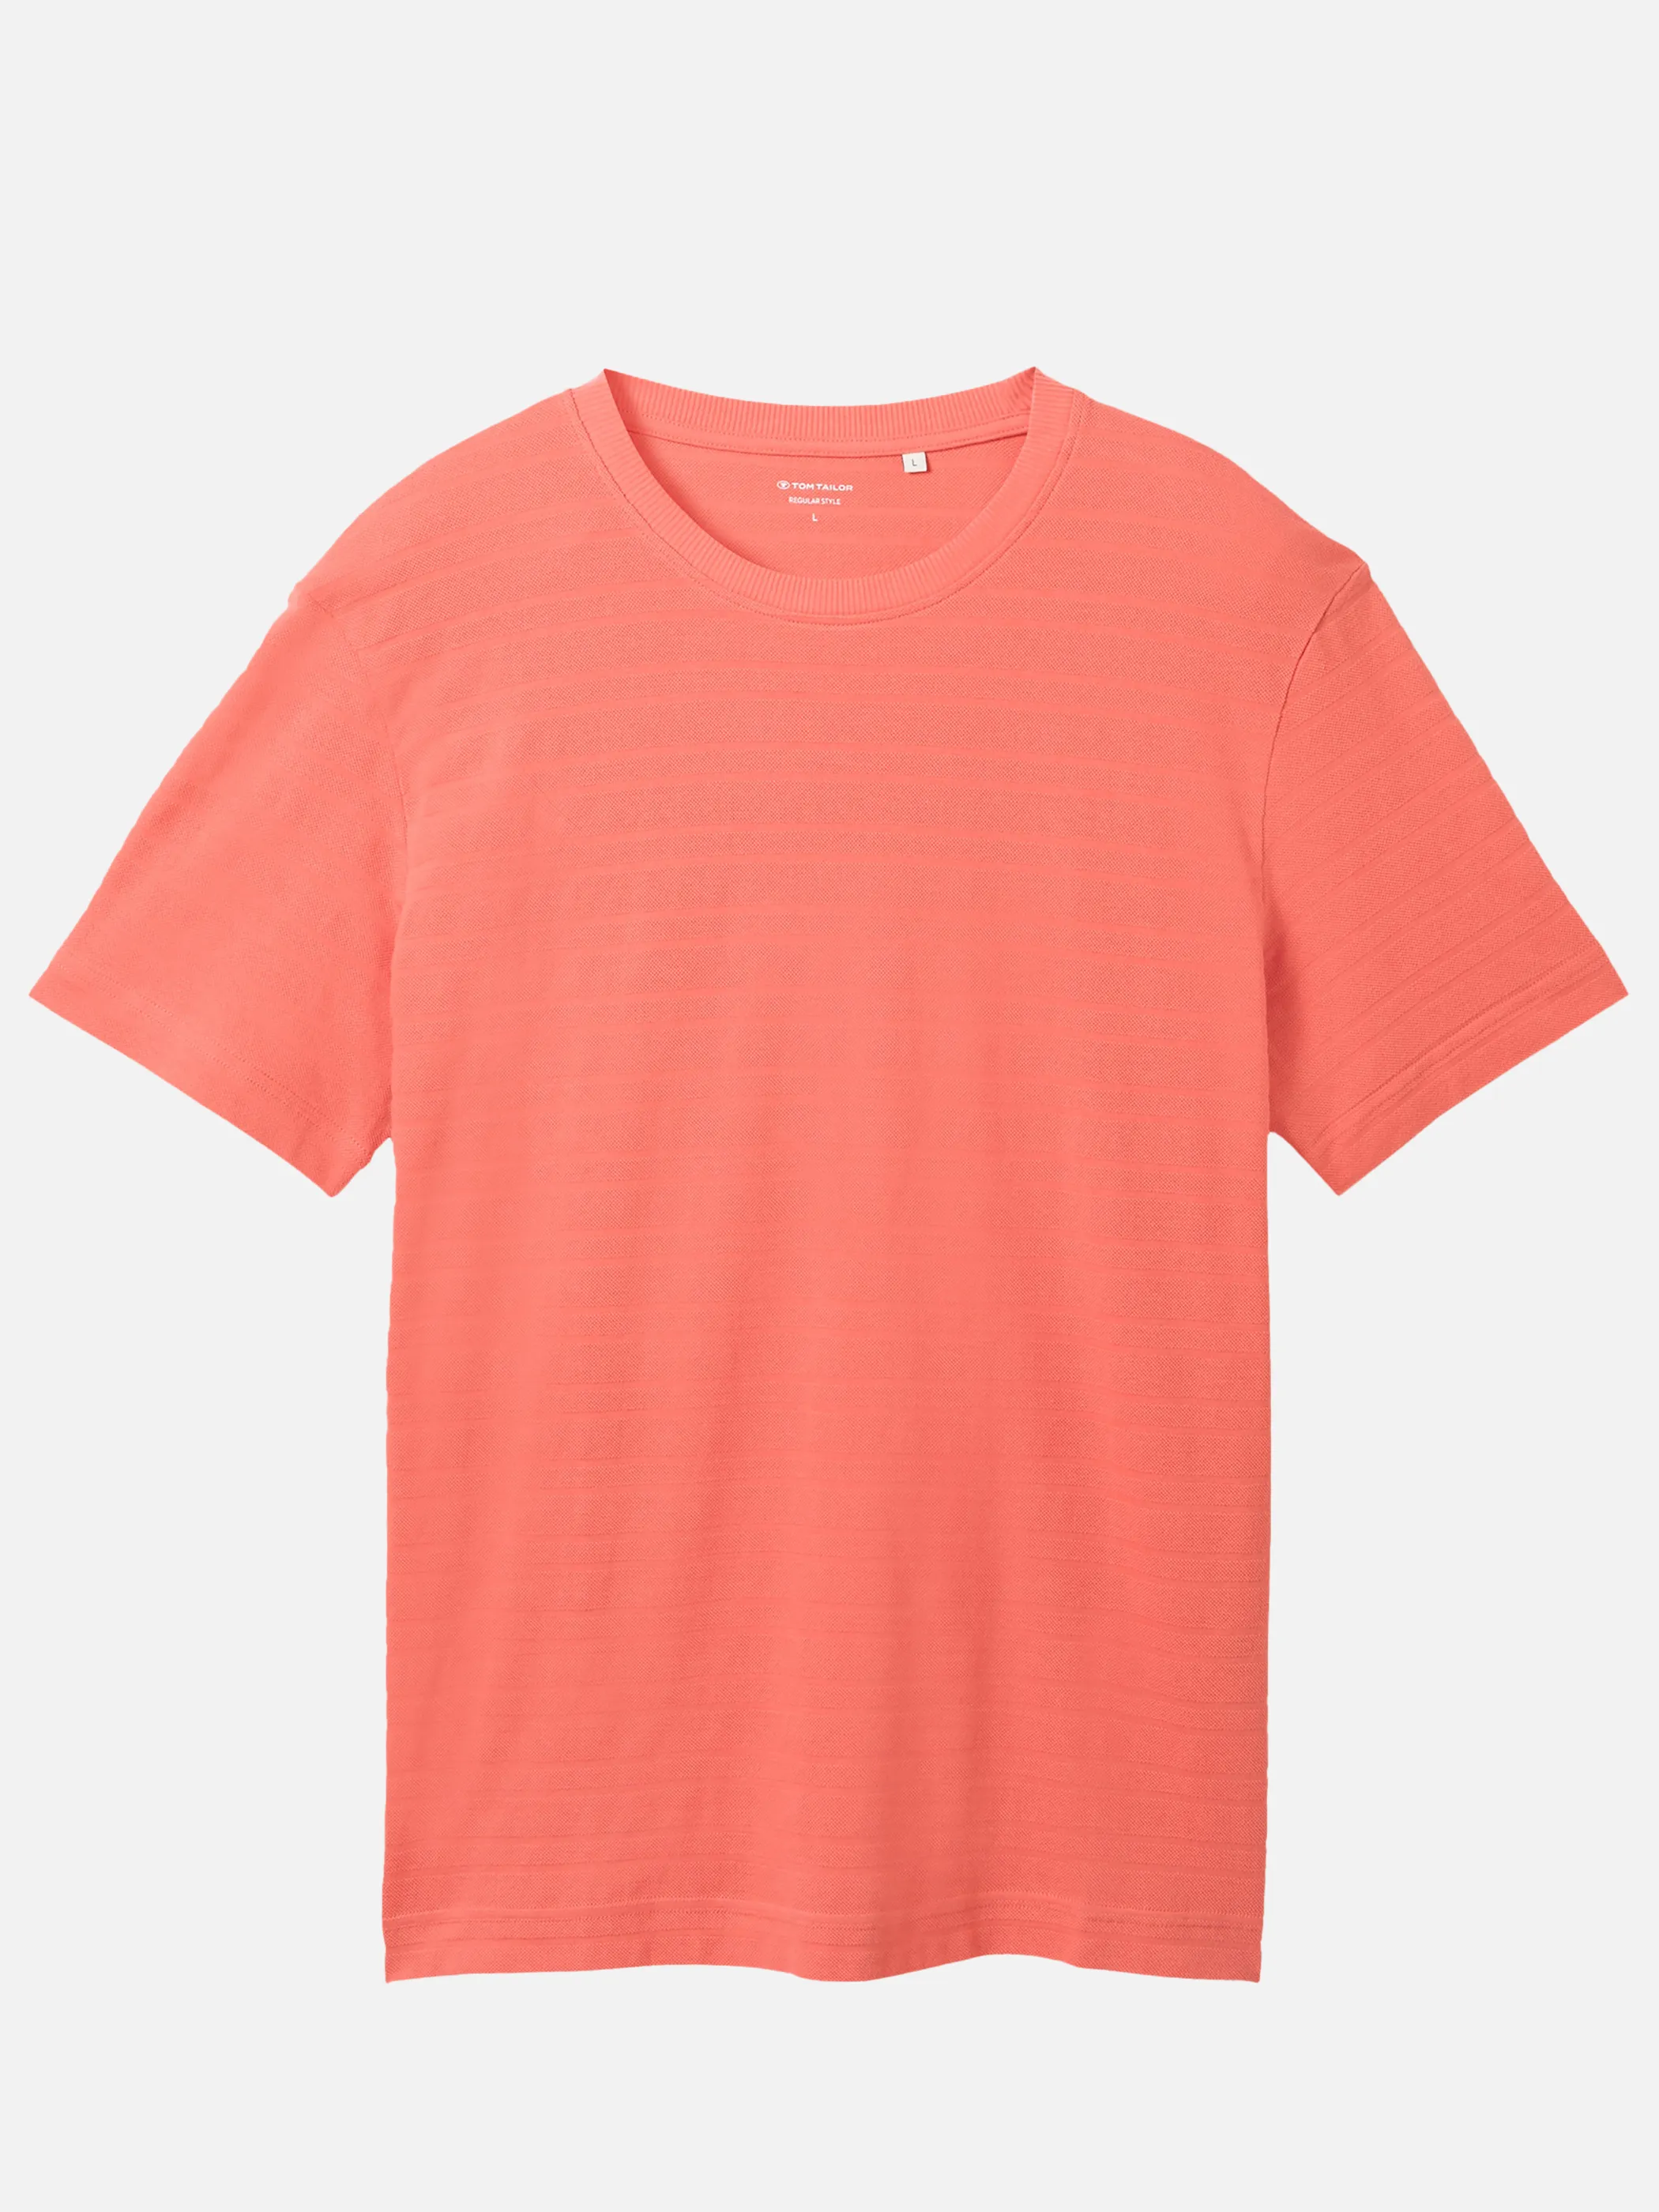 Tom Tailor 1042131 structured t-shirt Pink 895628 26202 1